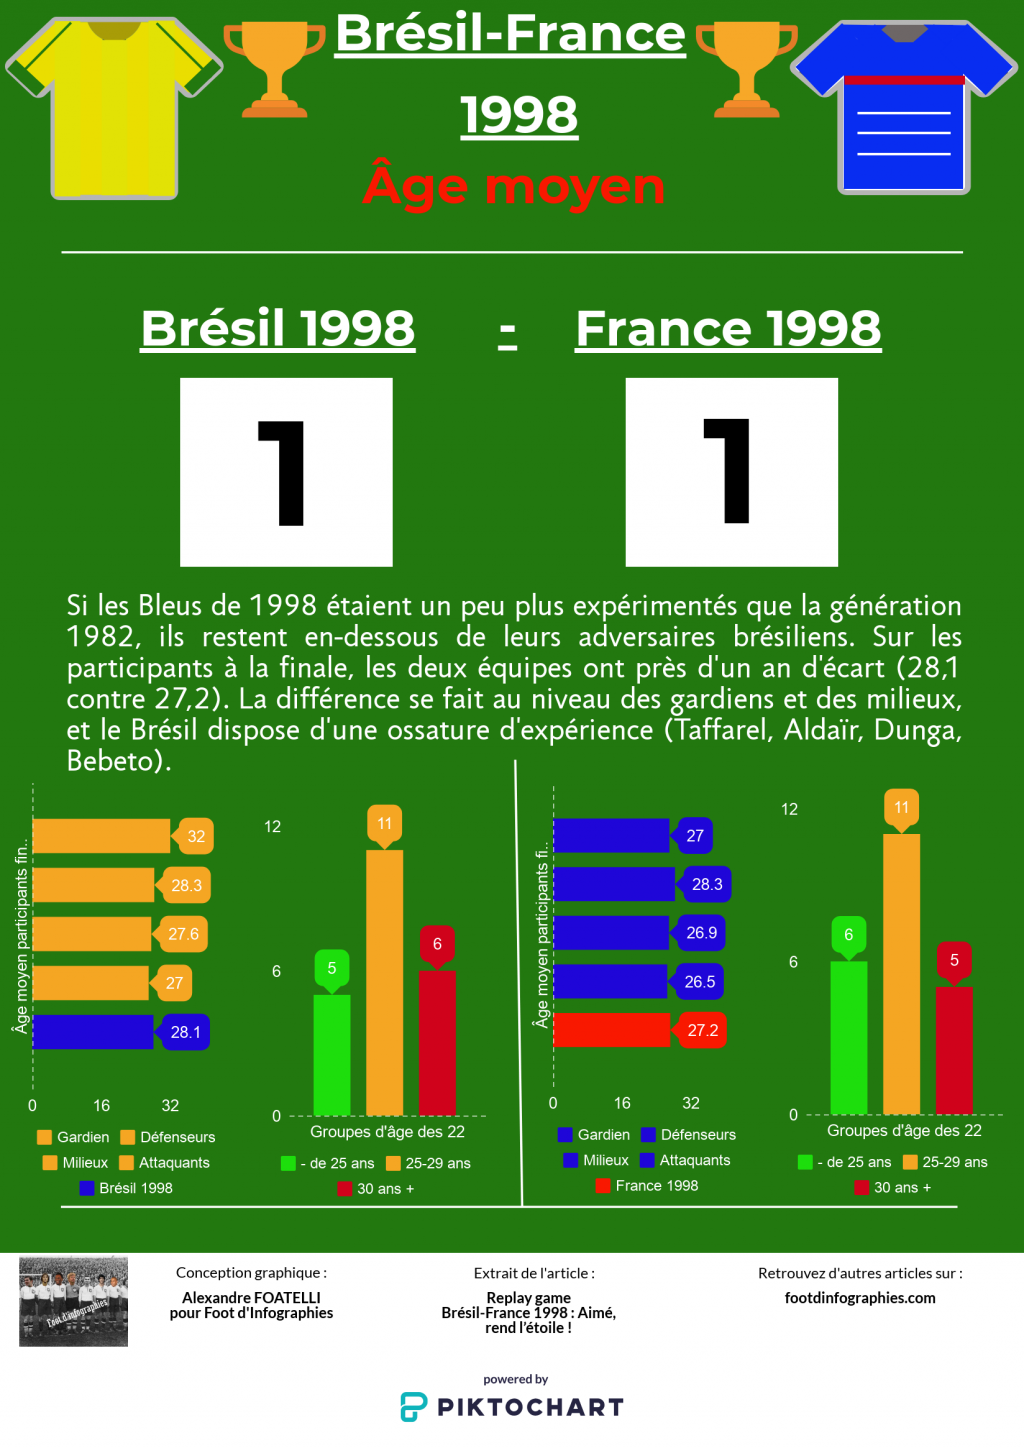 replay-game-bresil-france-1998-âge-moyen-foot-dinfographies